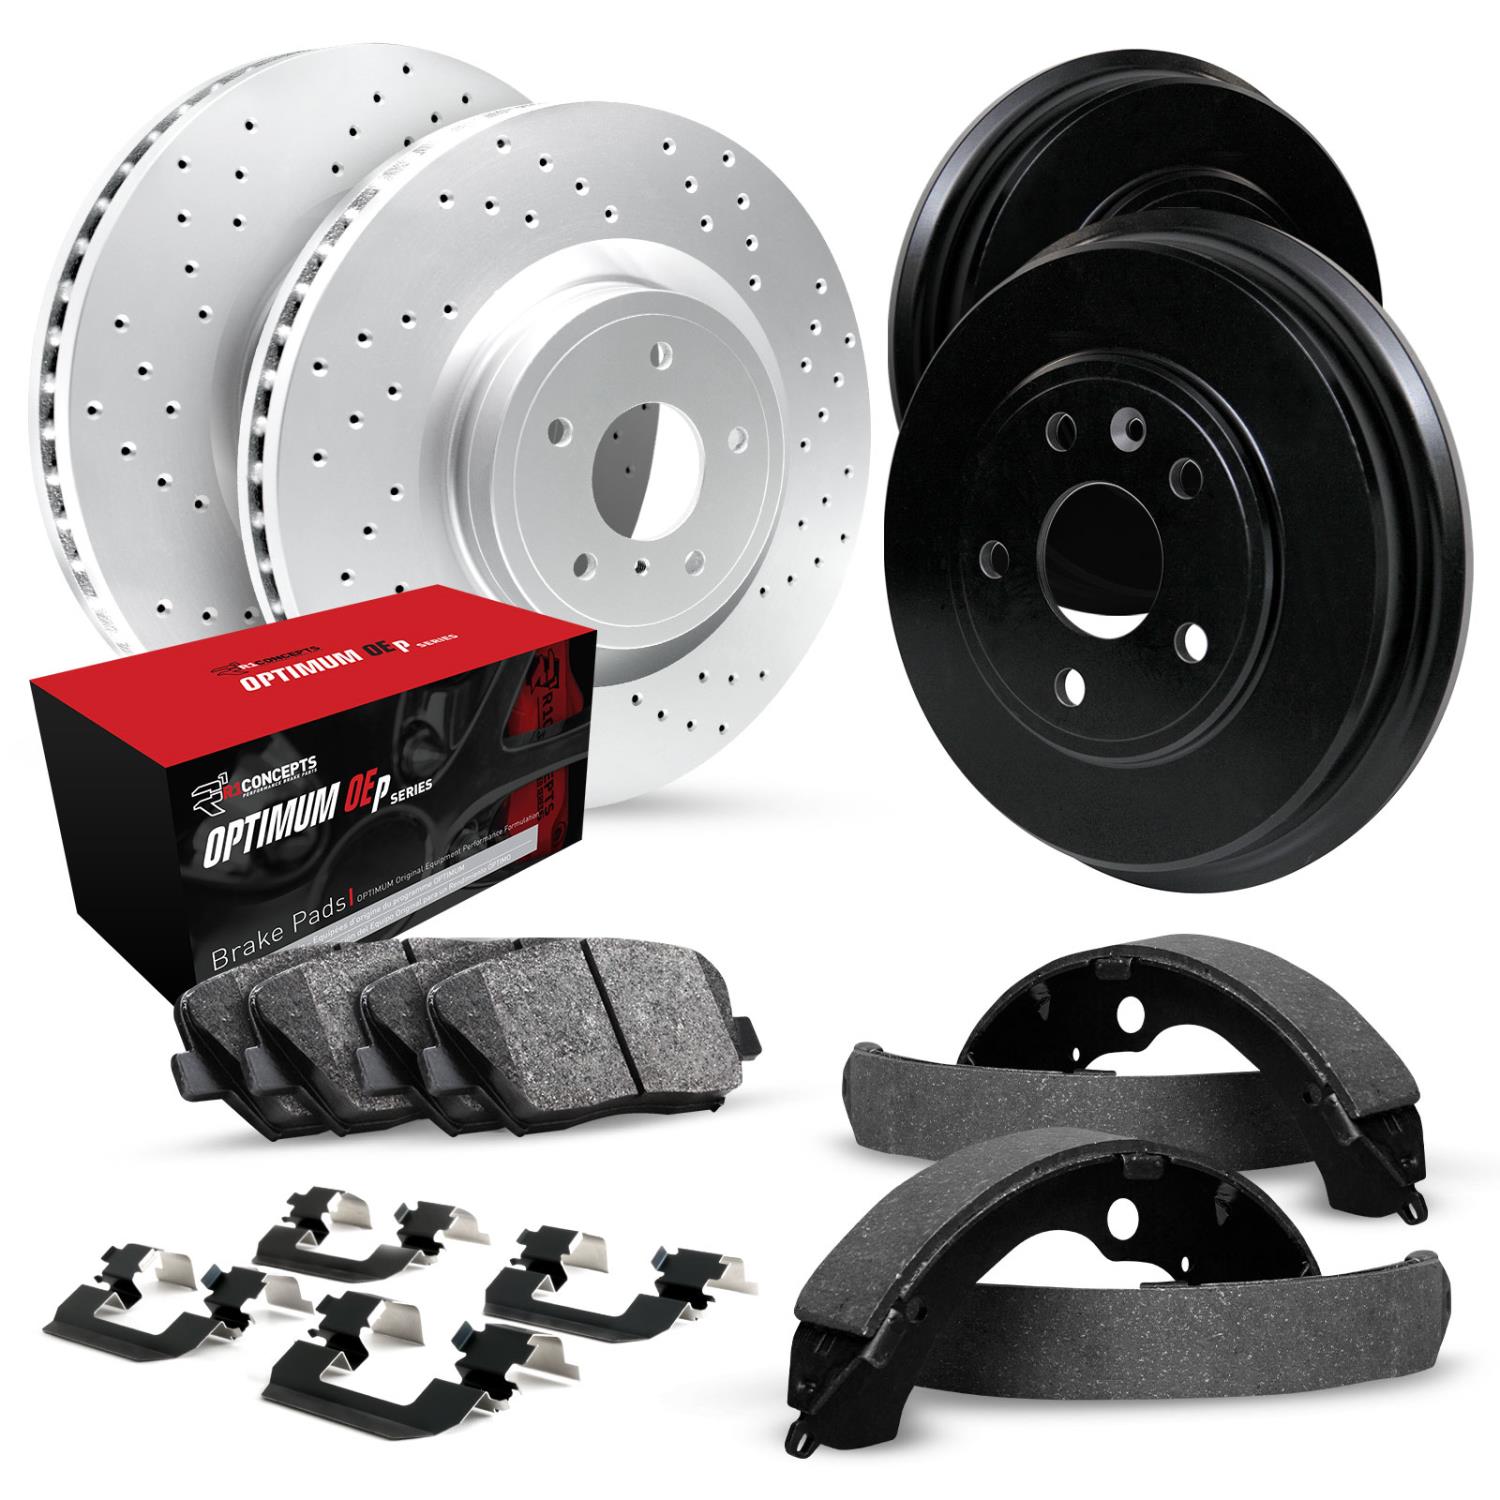 GEO-Carbon Drilled Brake Rotor & Drum Set w/Optimum OE Pads, Shoes, & Hardware, 1994-1997 GM, Position: Front & Rear